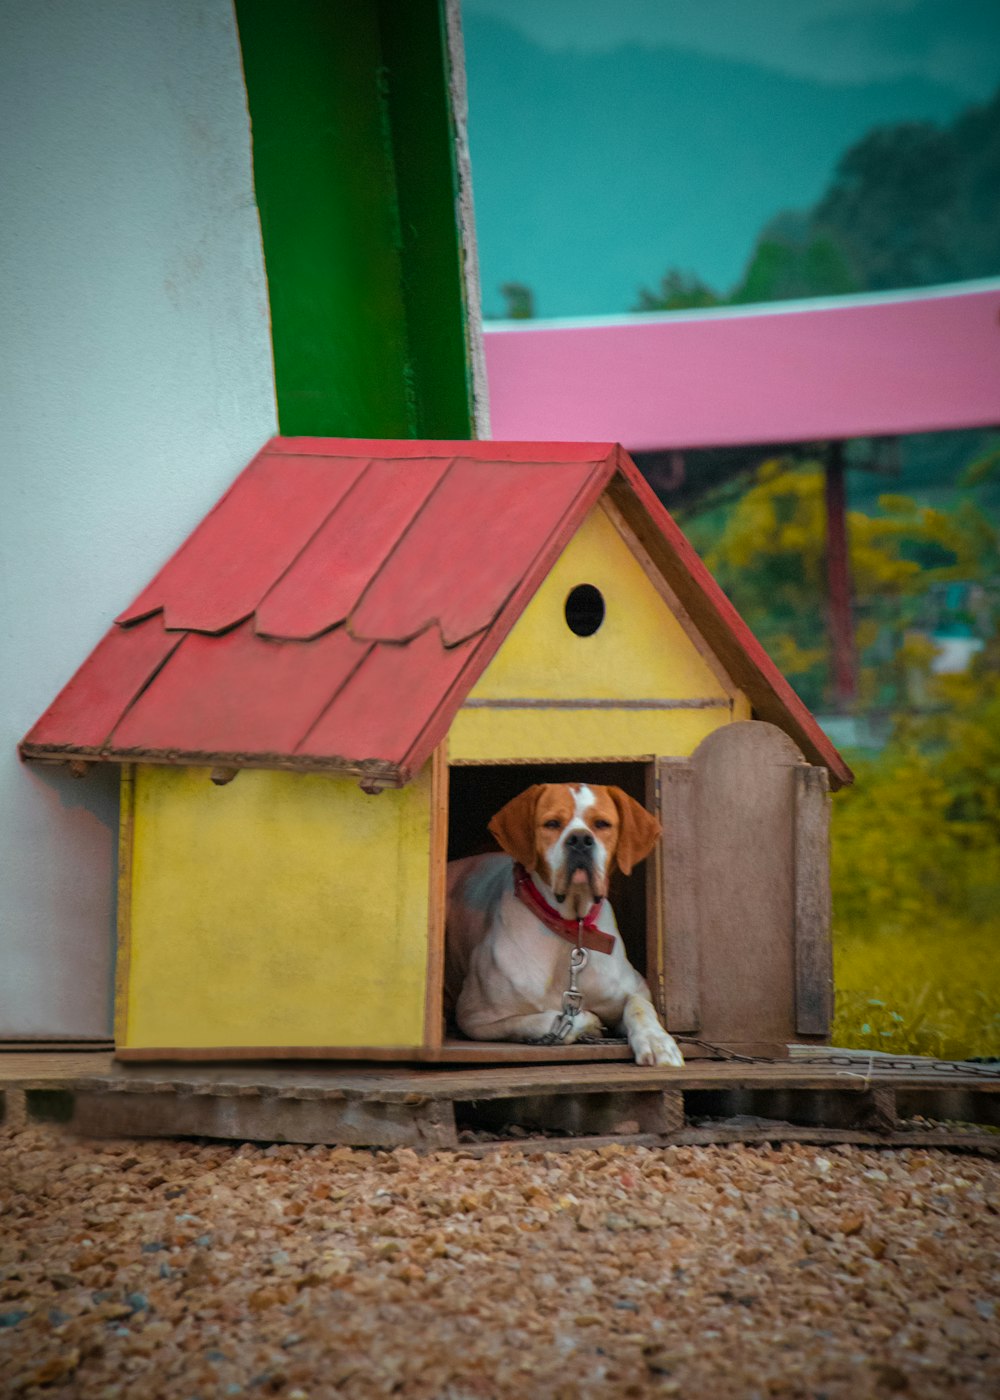 brown and white short coated dog on red and green wooden house